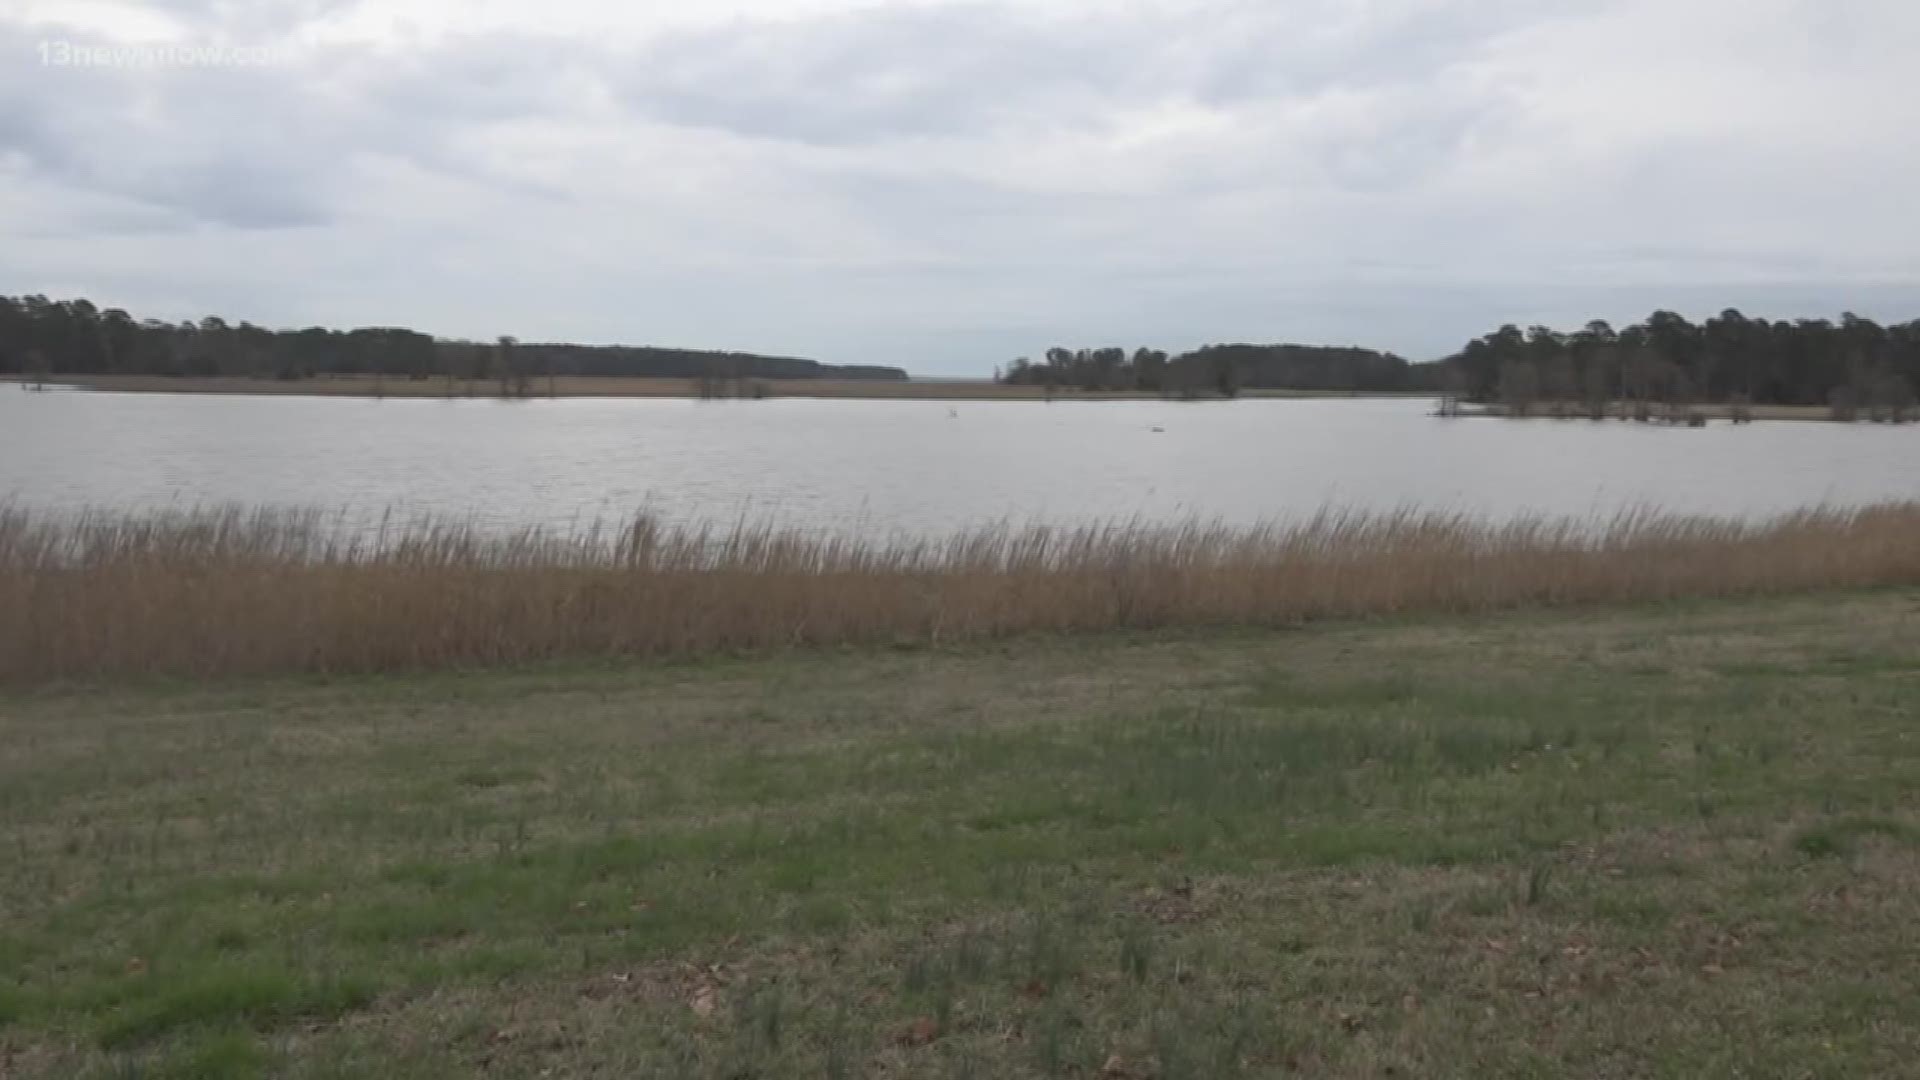 Boaters in James City County said they want more warning signs about the sand bars in the water.